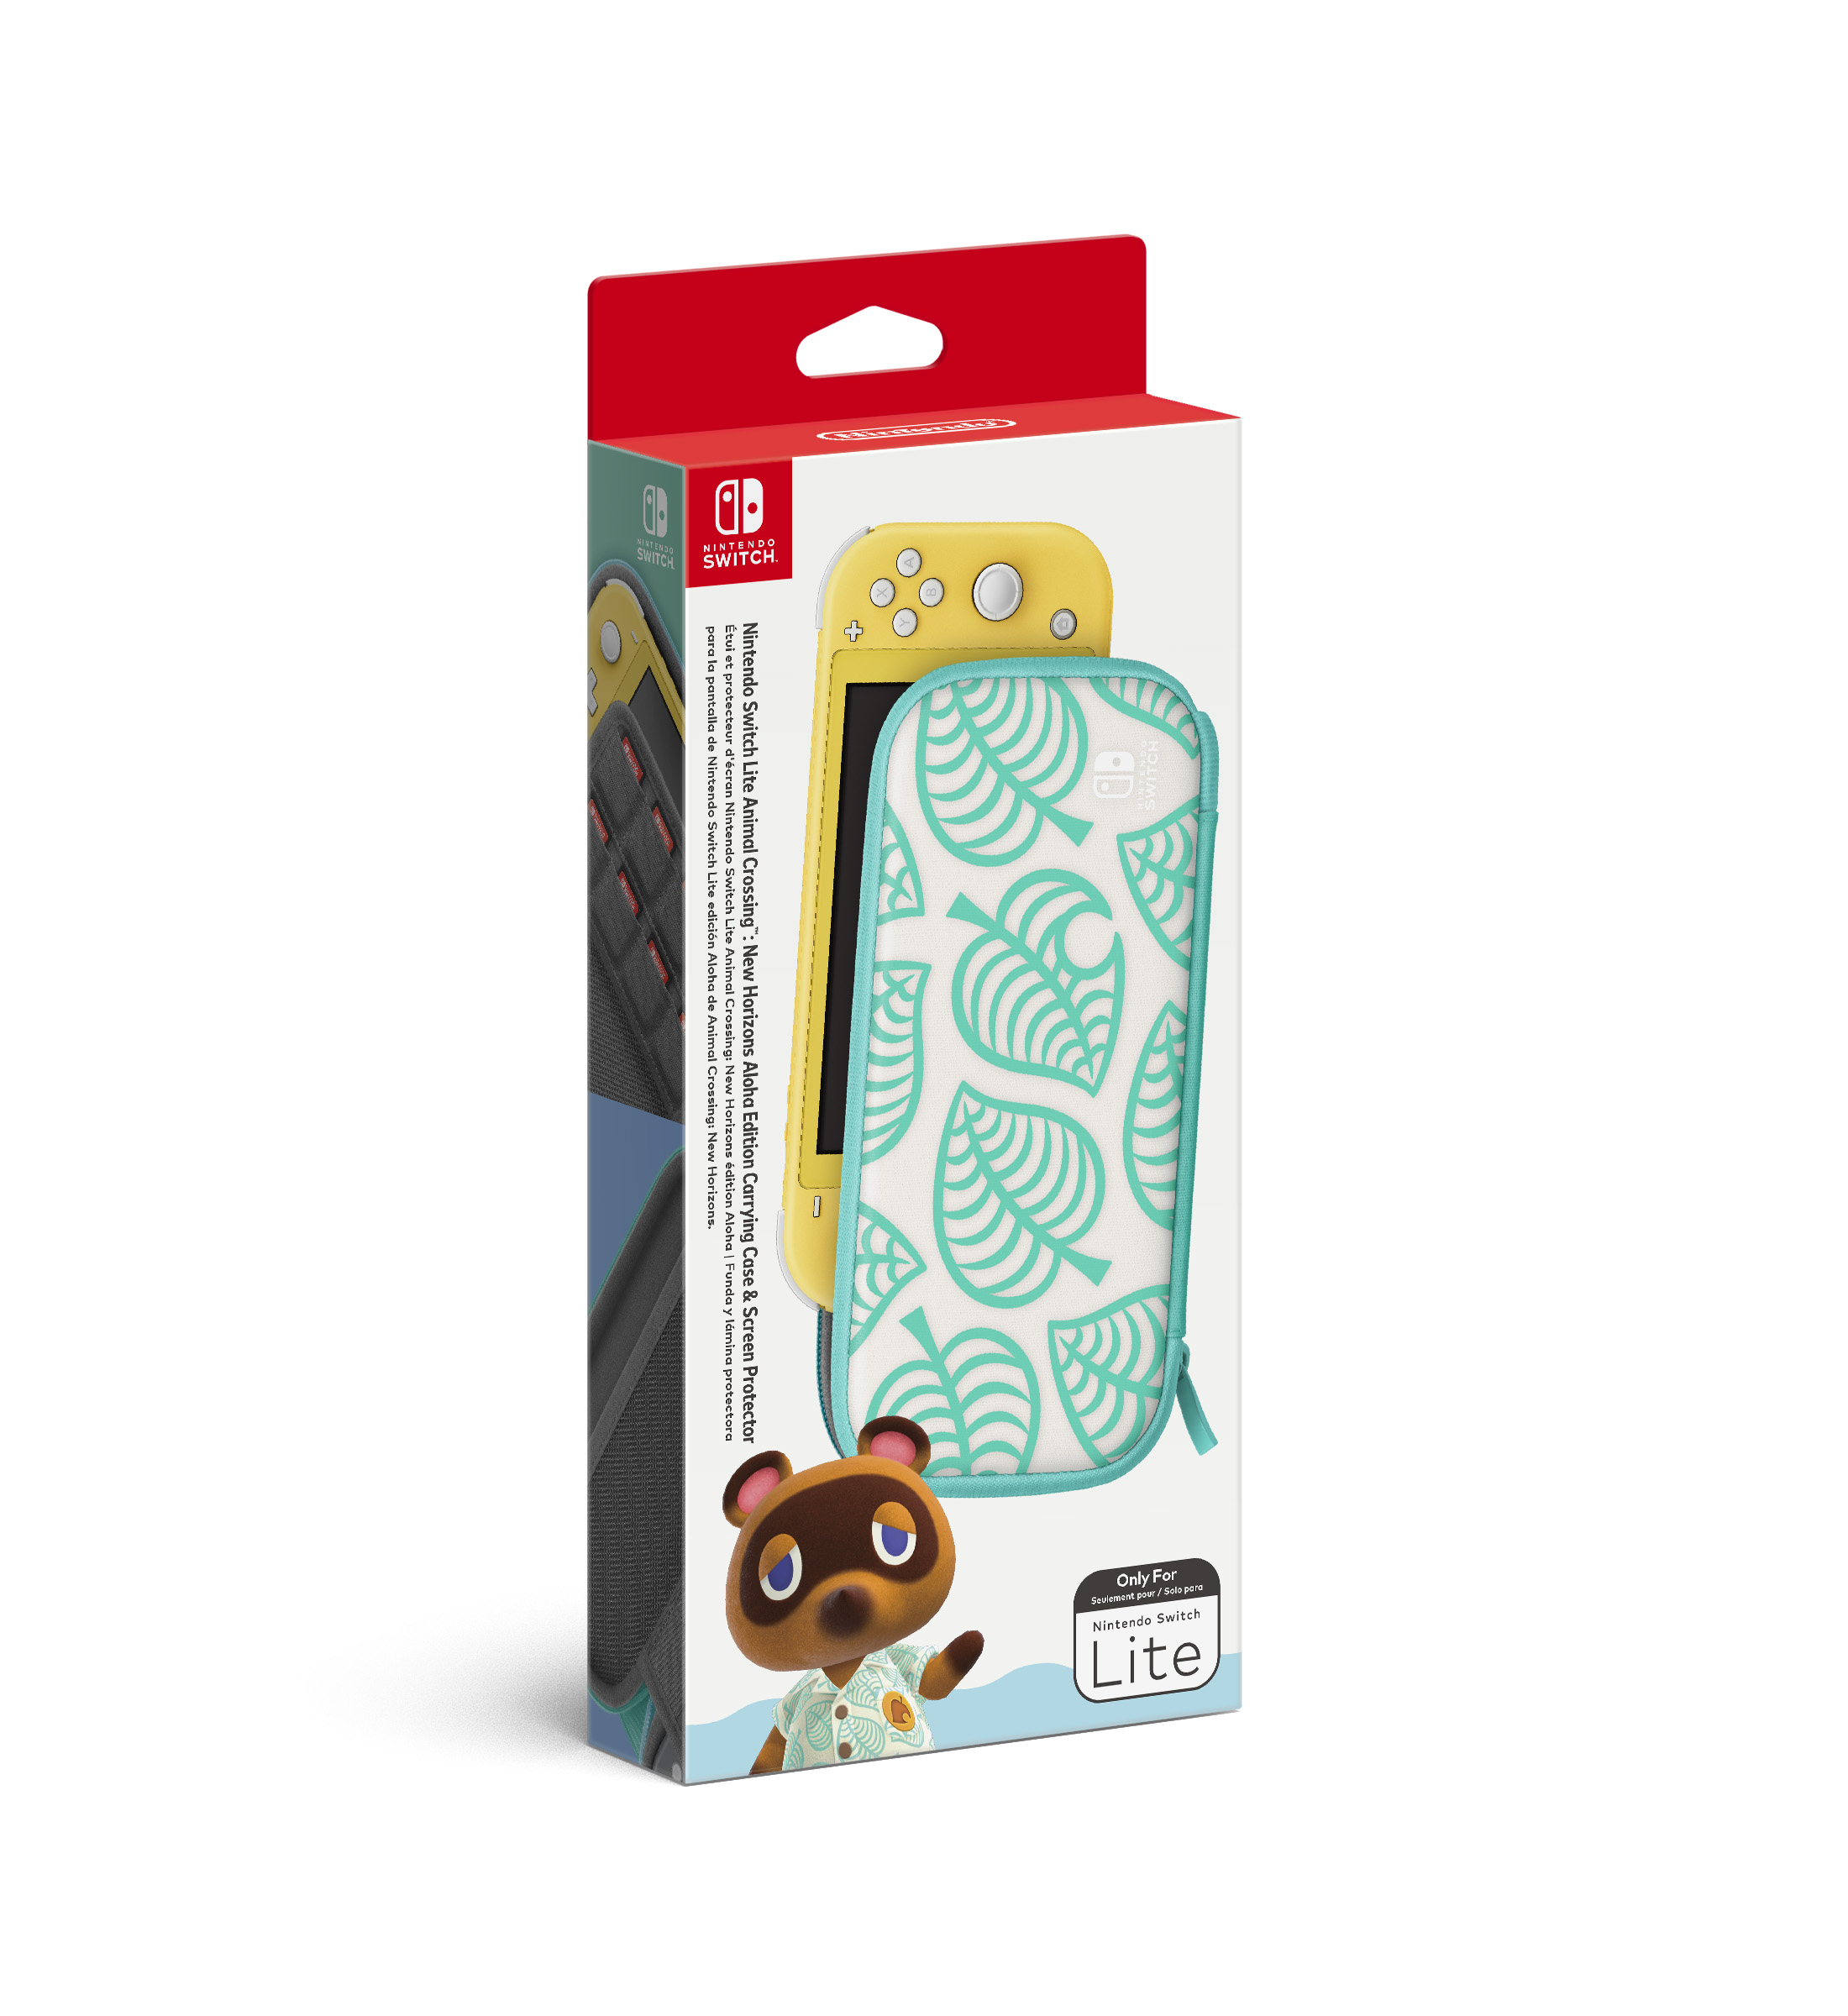 Nintendo Switch Lite Animal Crossing: New Horizons Aloha Edition Carrying Case & Screen Protector - image 1 of 2